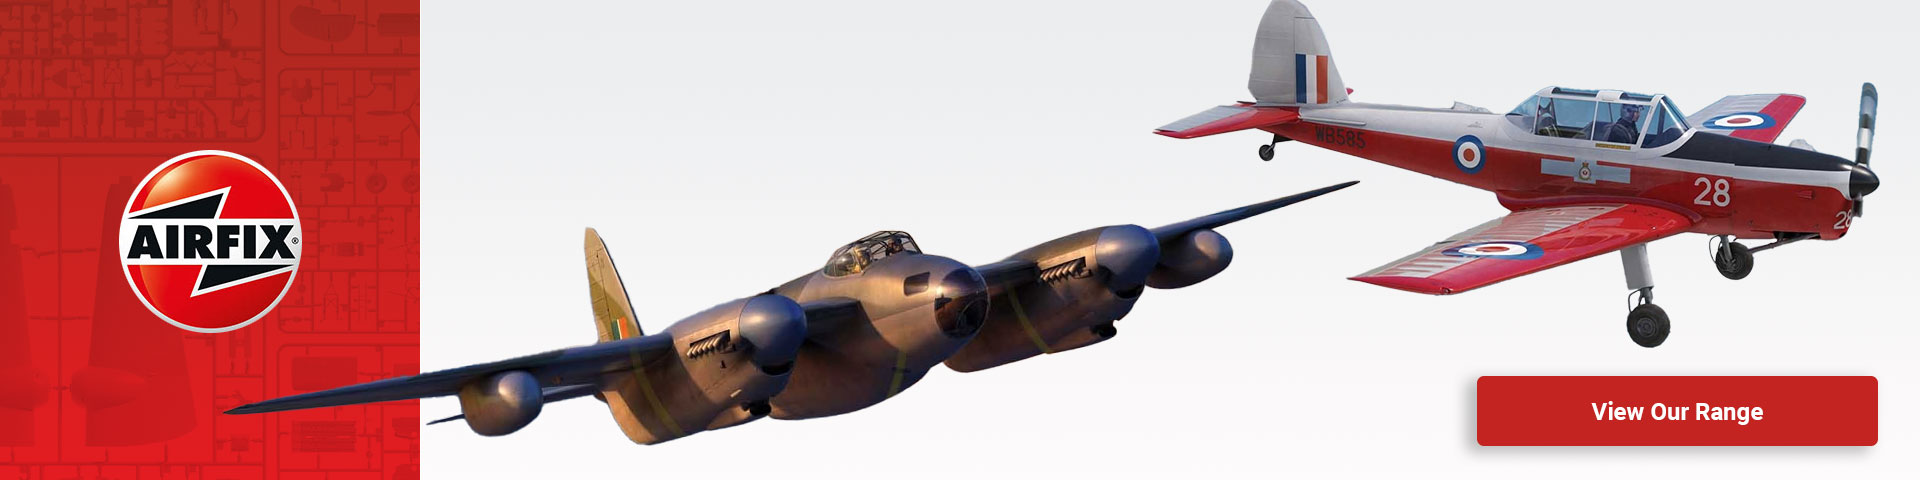 View our range of Airfix models